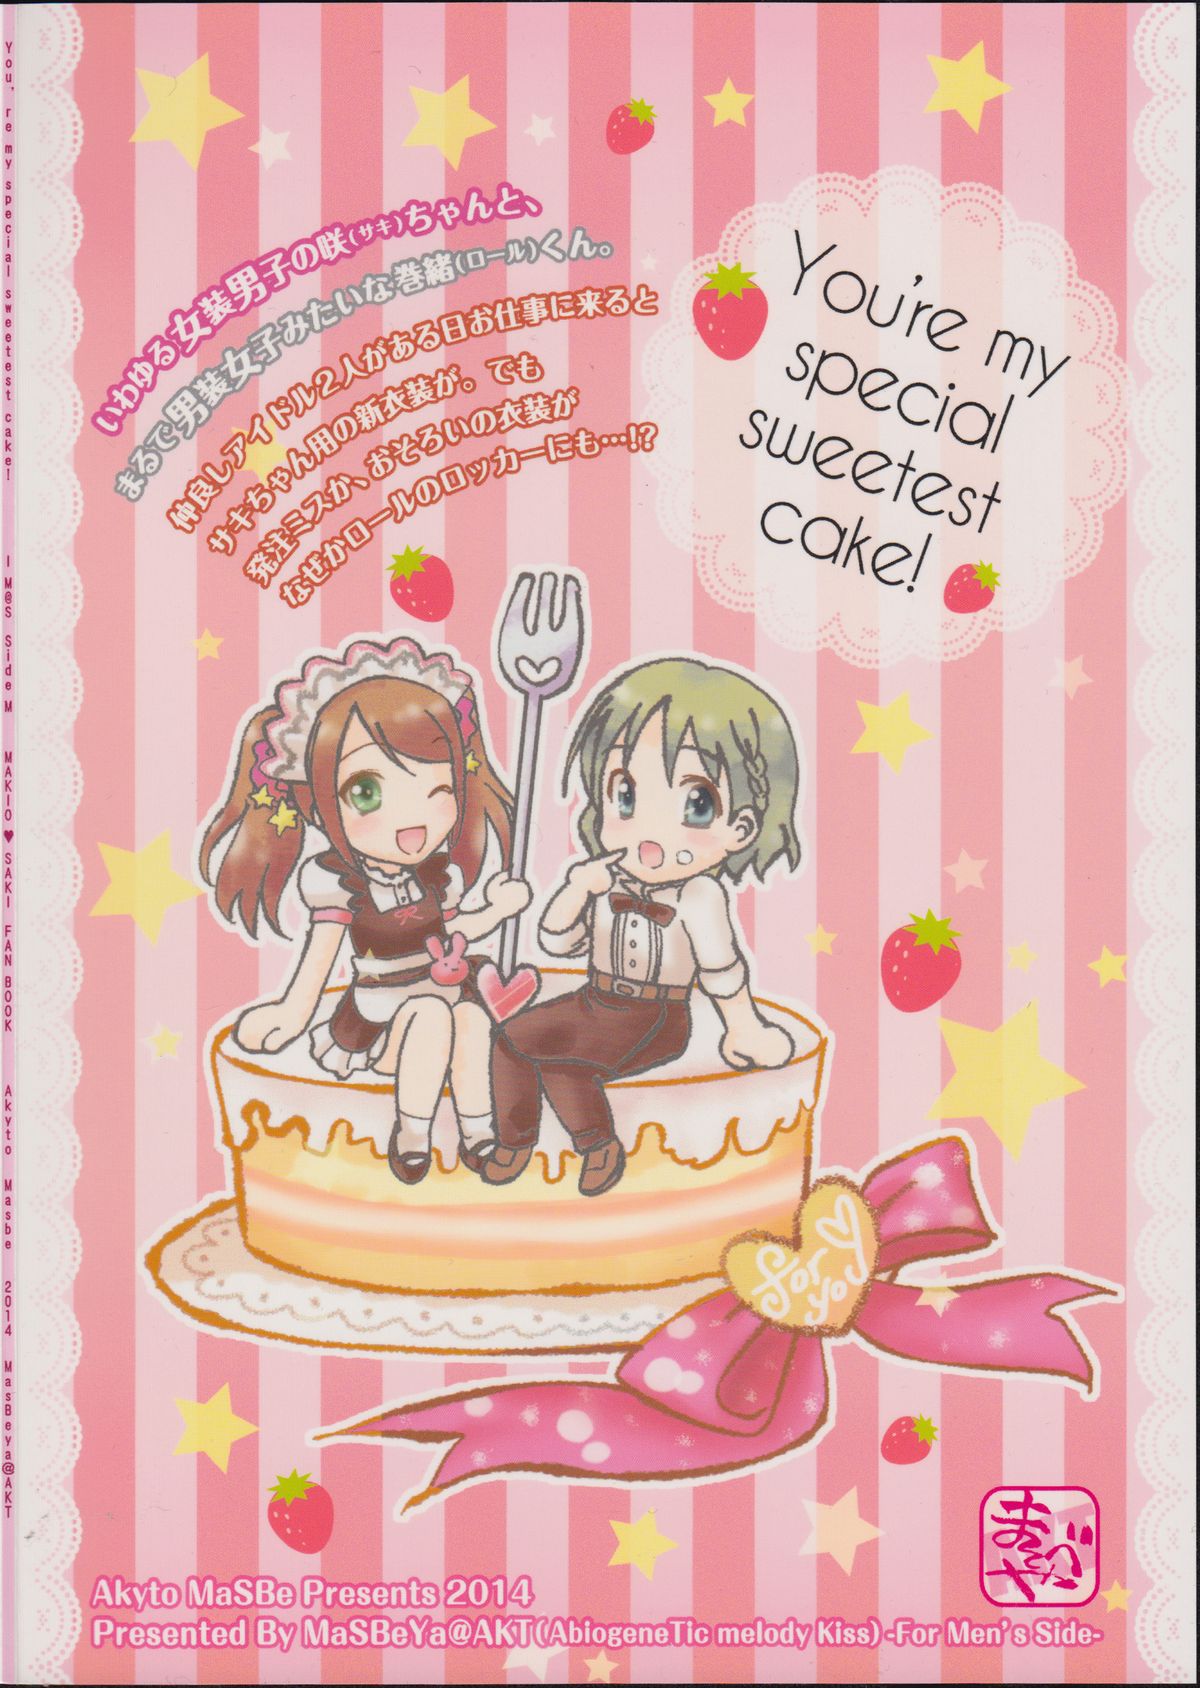 (C87) [まそべ家AKT@AbiOgeneTic melodY KIss(For Men's Side) (まそべ晶磨)] You're my special sweetest cake! (アイドルマスター SideM)